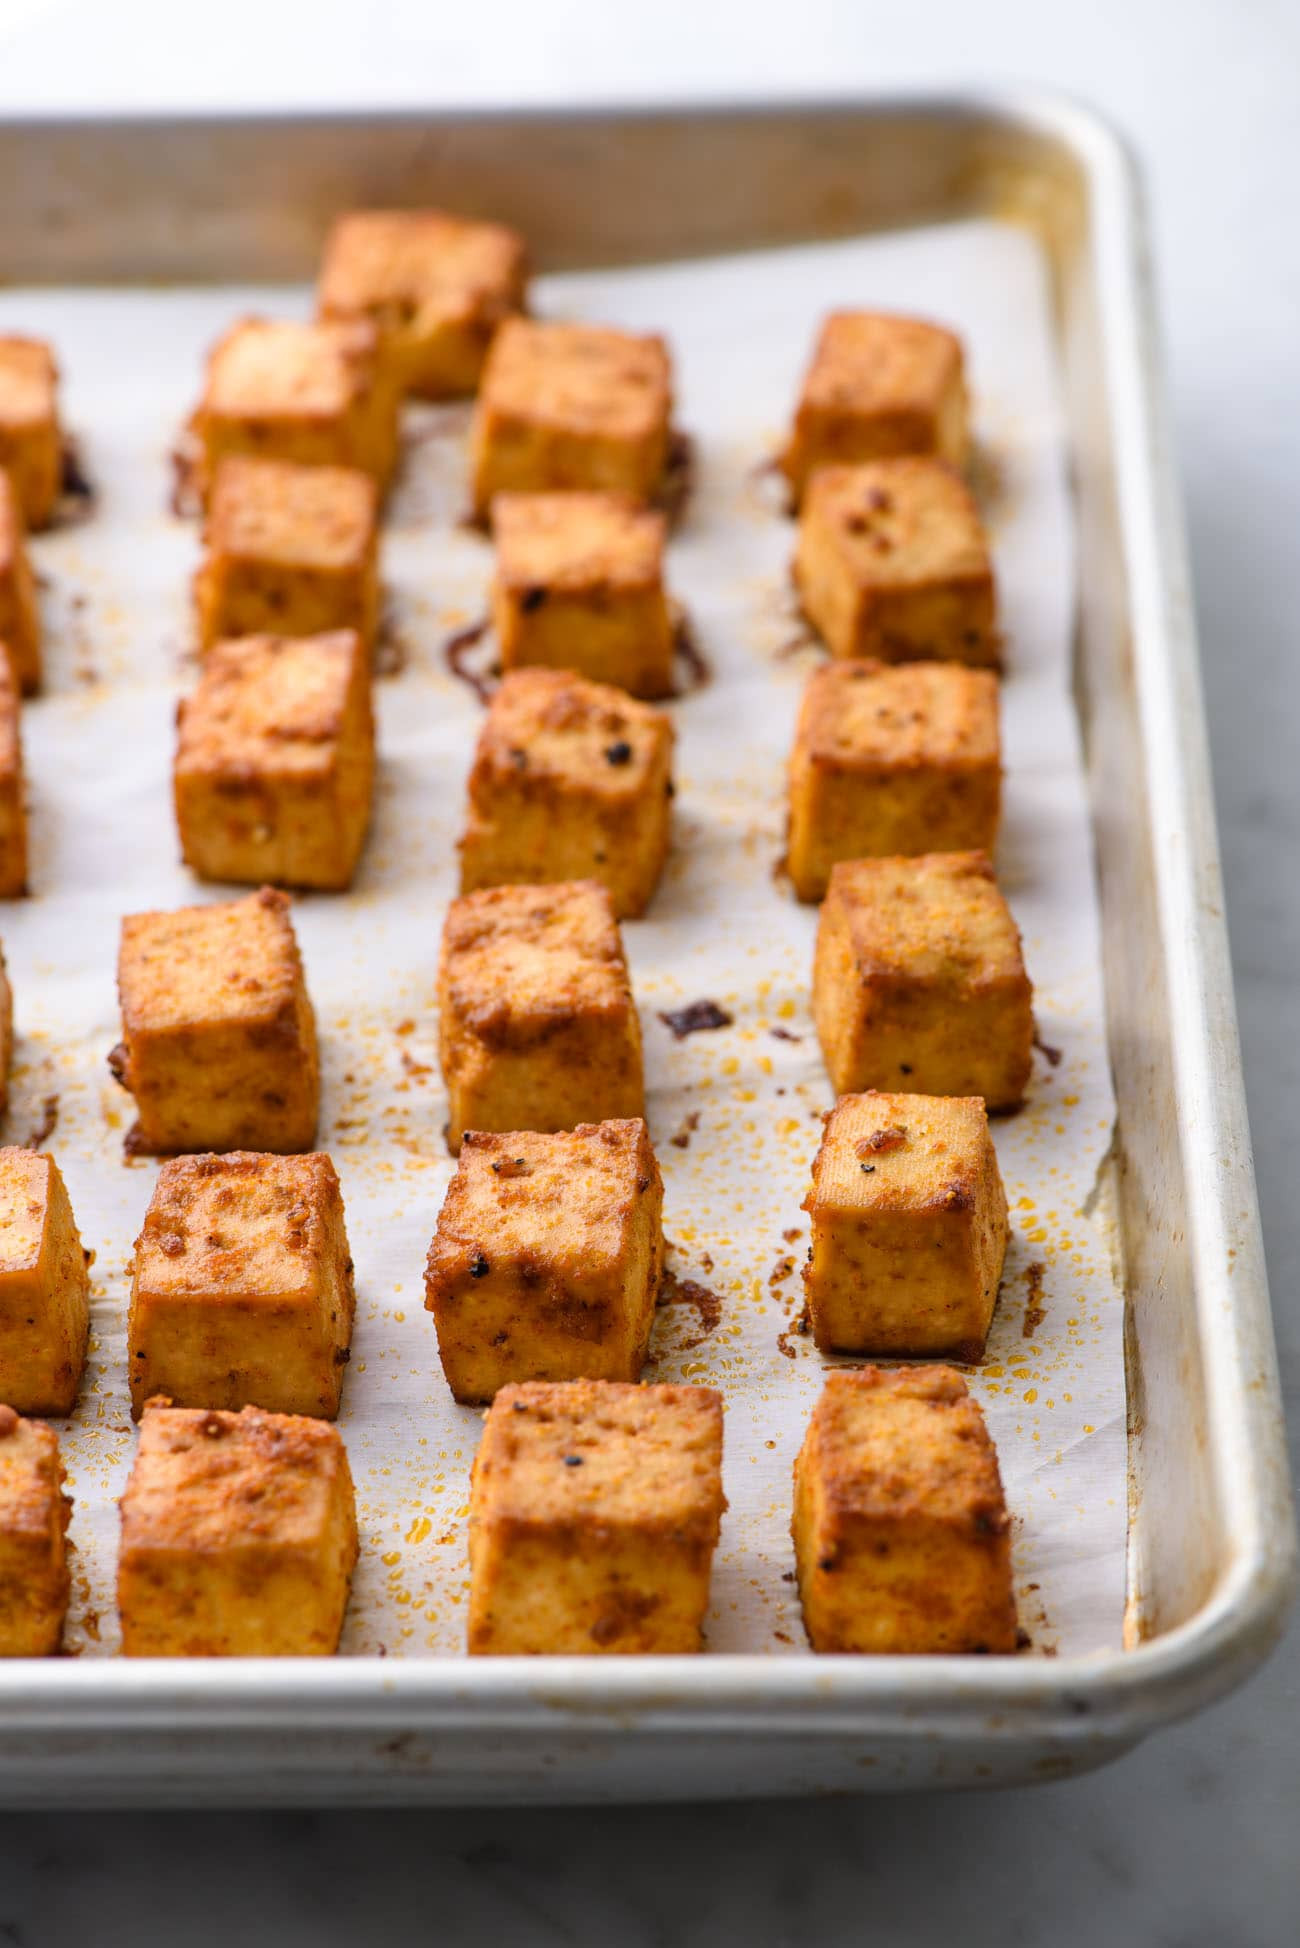 Cubed Tofu Recipes
 Easy Baked Tofu Perfect for Meal Prep